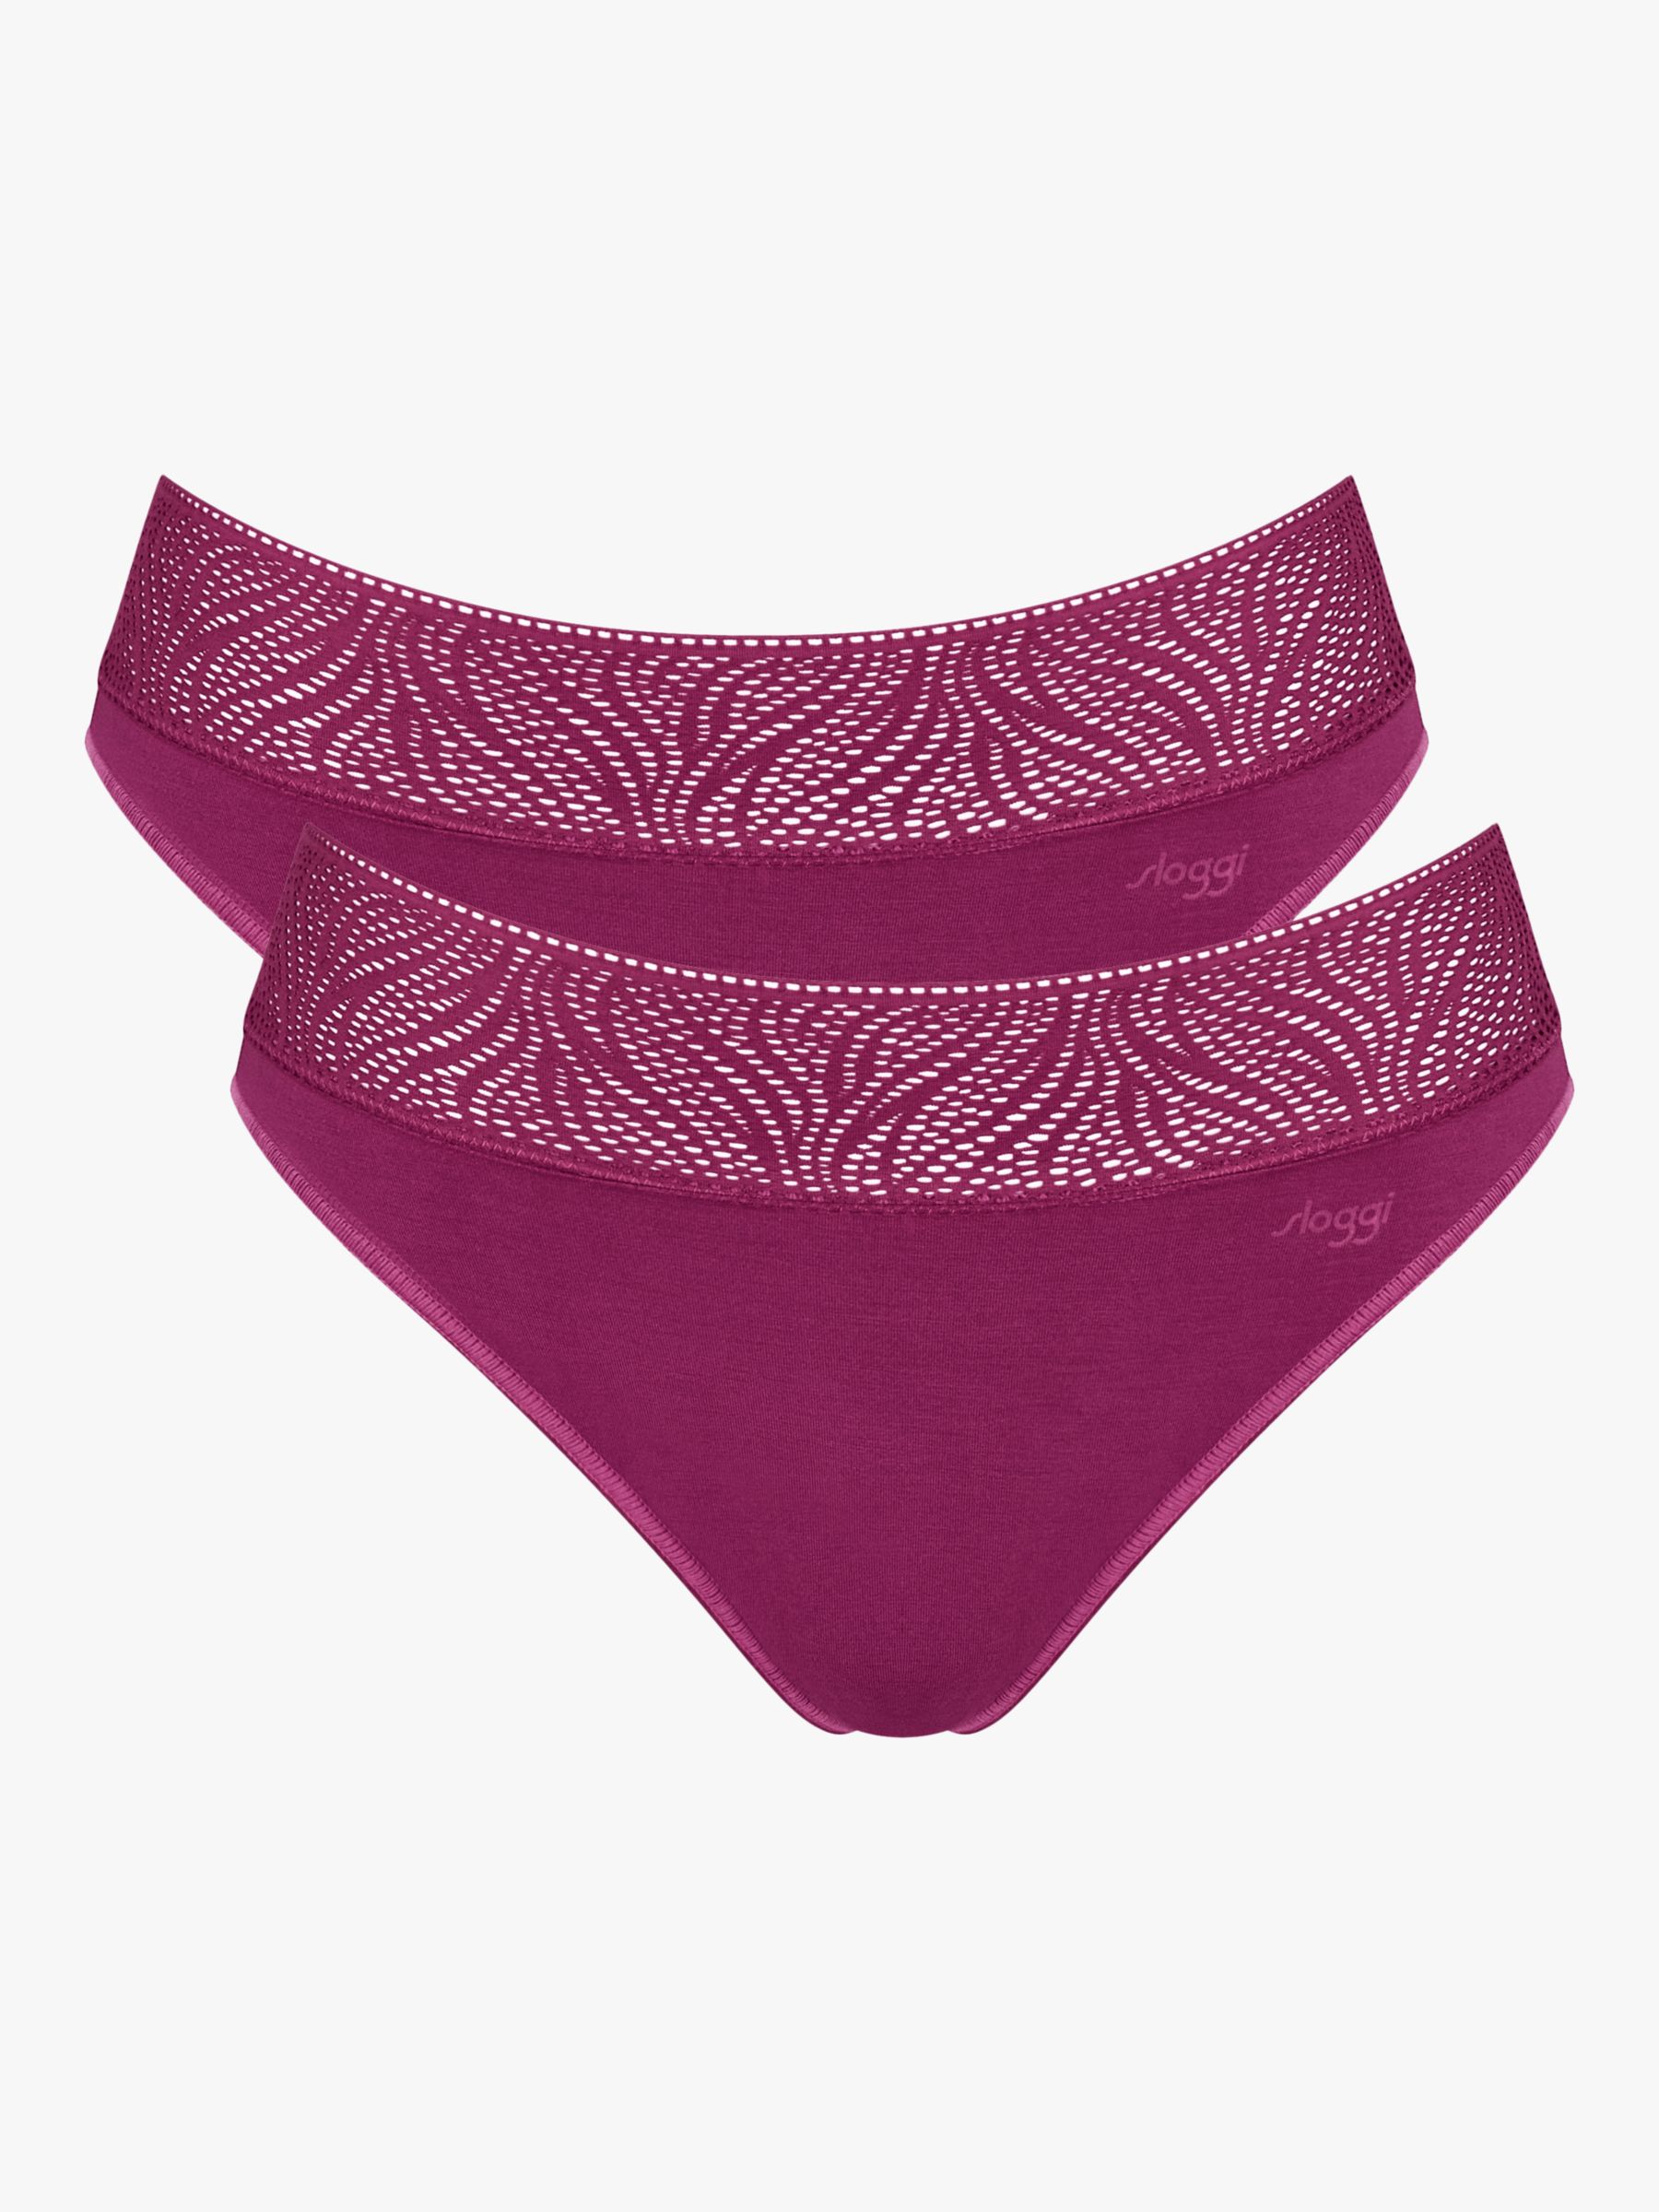 sloggi Light Absorbency Tai Period Knickers, Pack of 2, Wine at John Lewis  & Partners